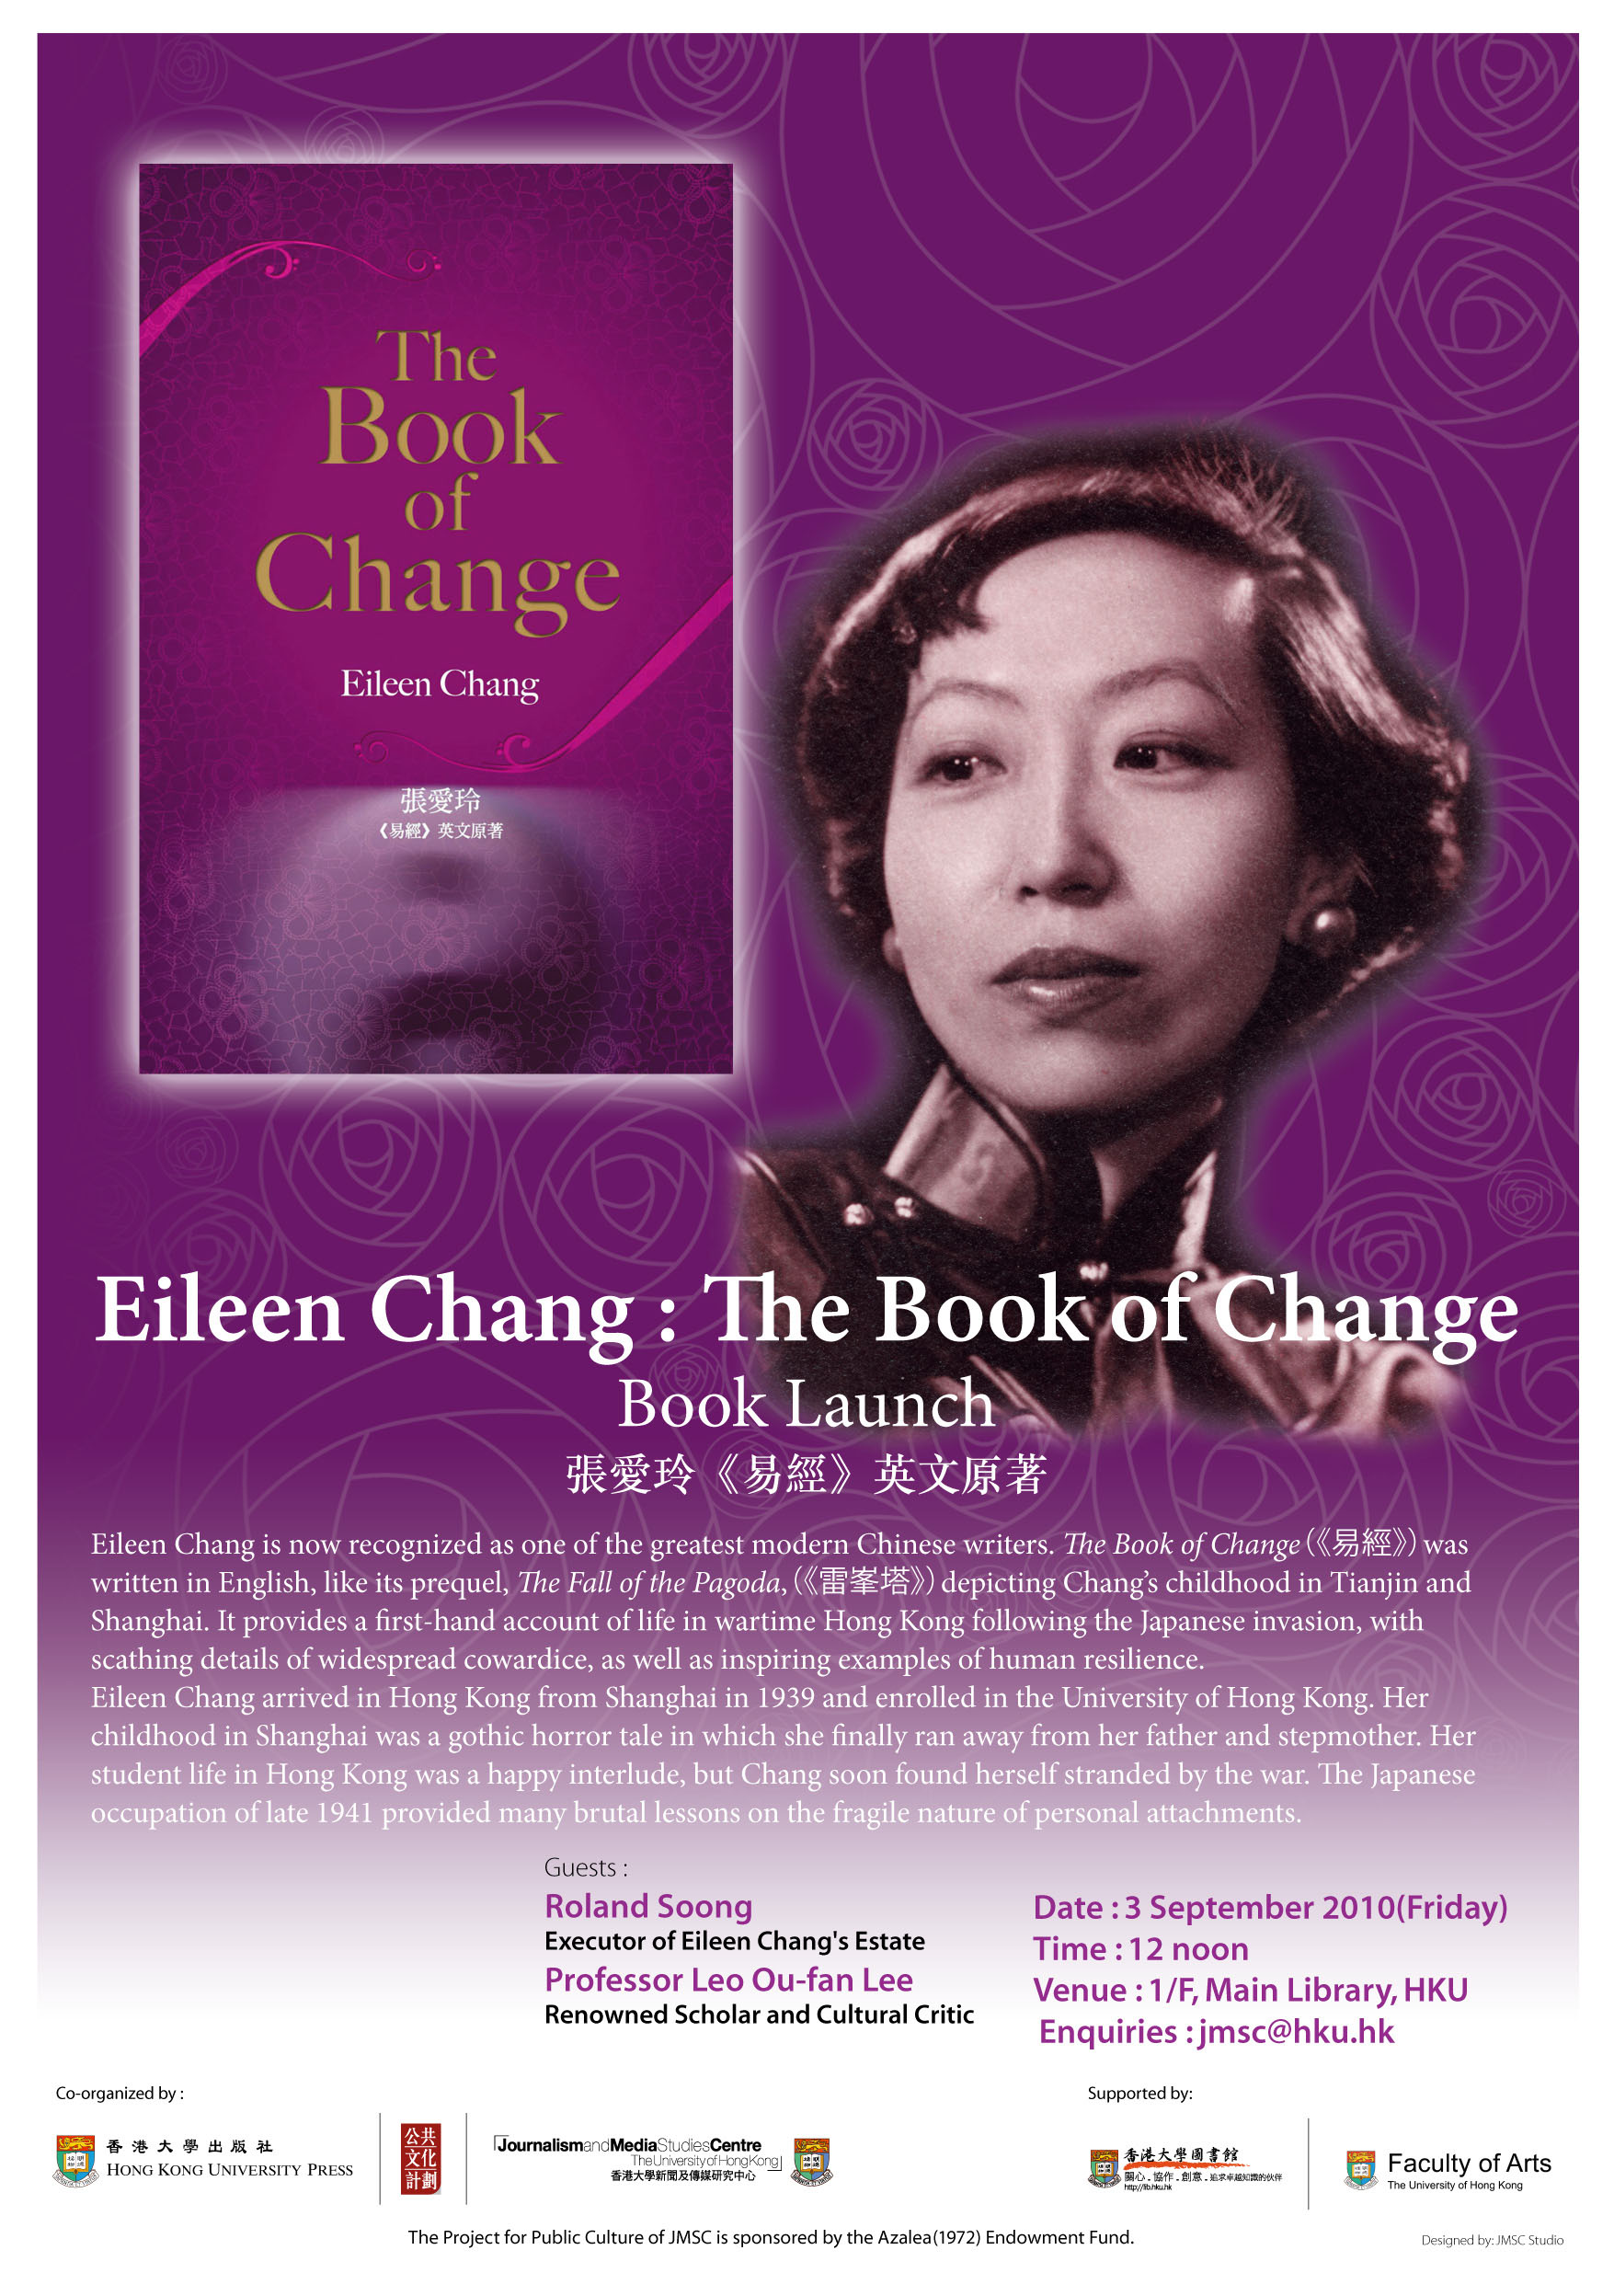 Book Launch : Eileen Chang : The Book of Change